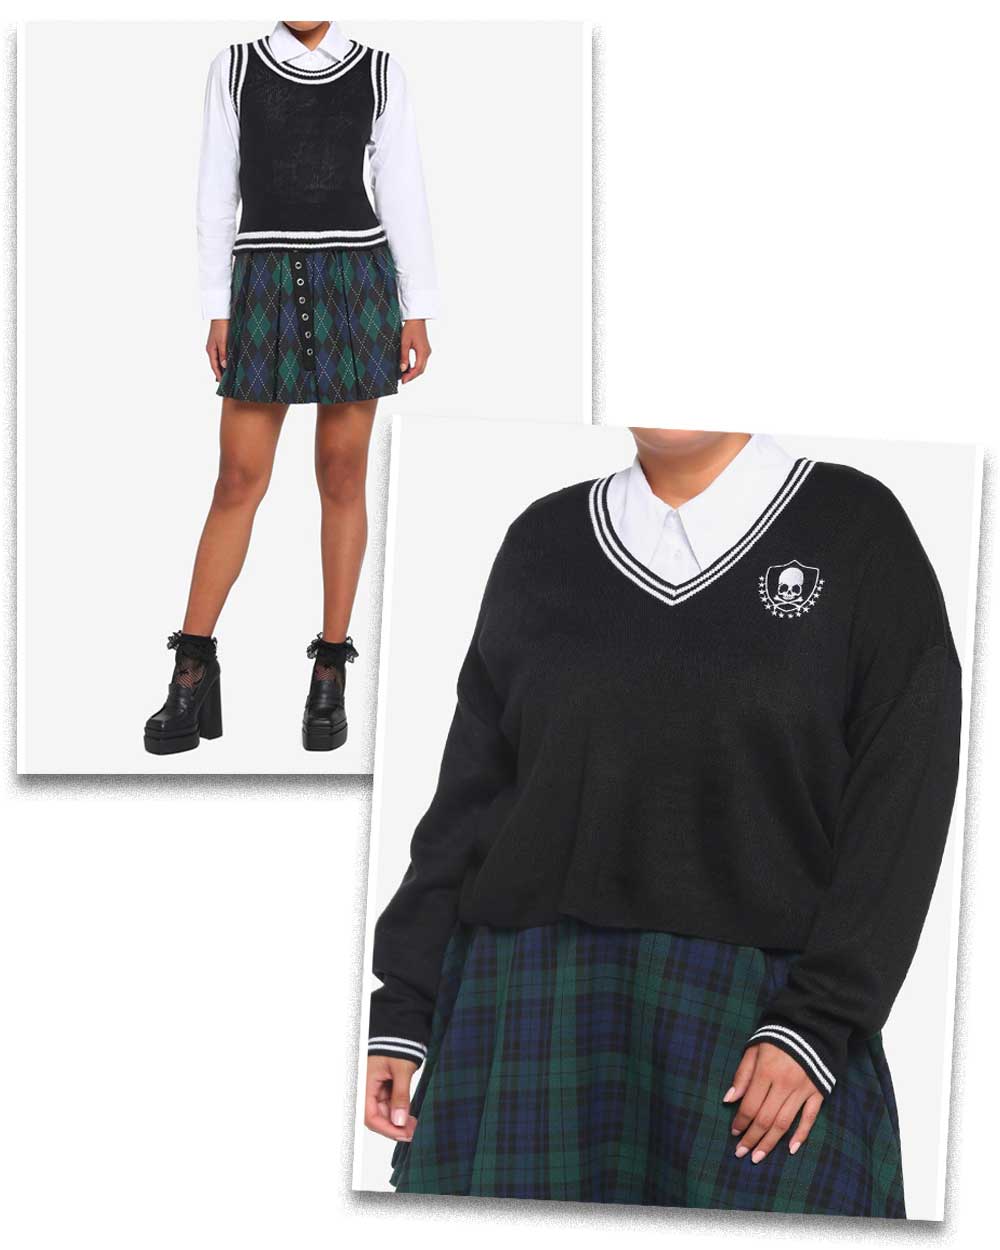 Emo outfits for school